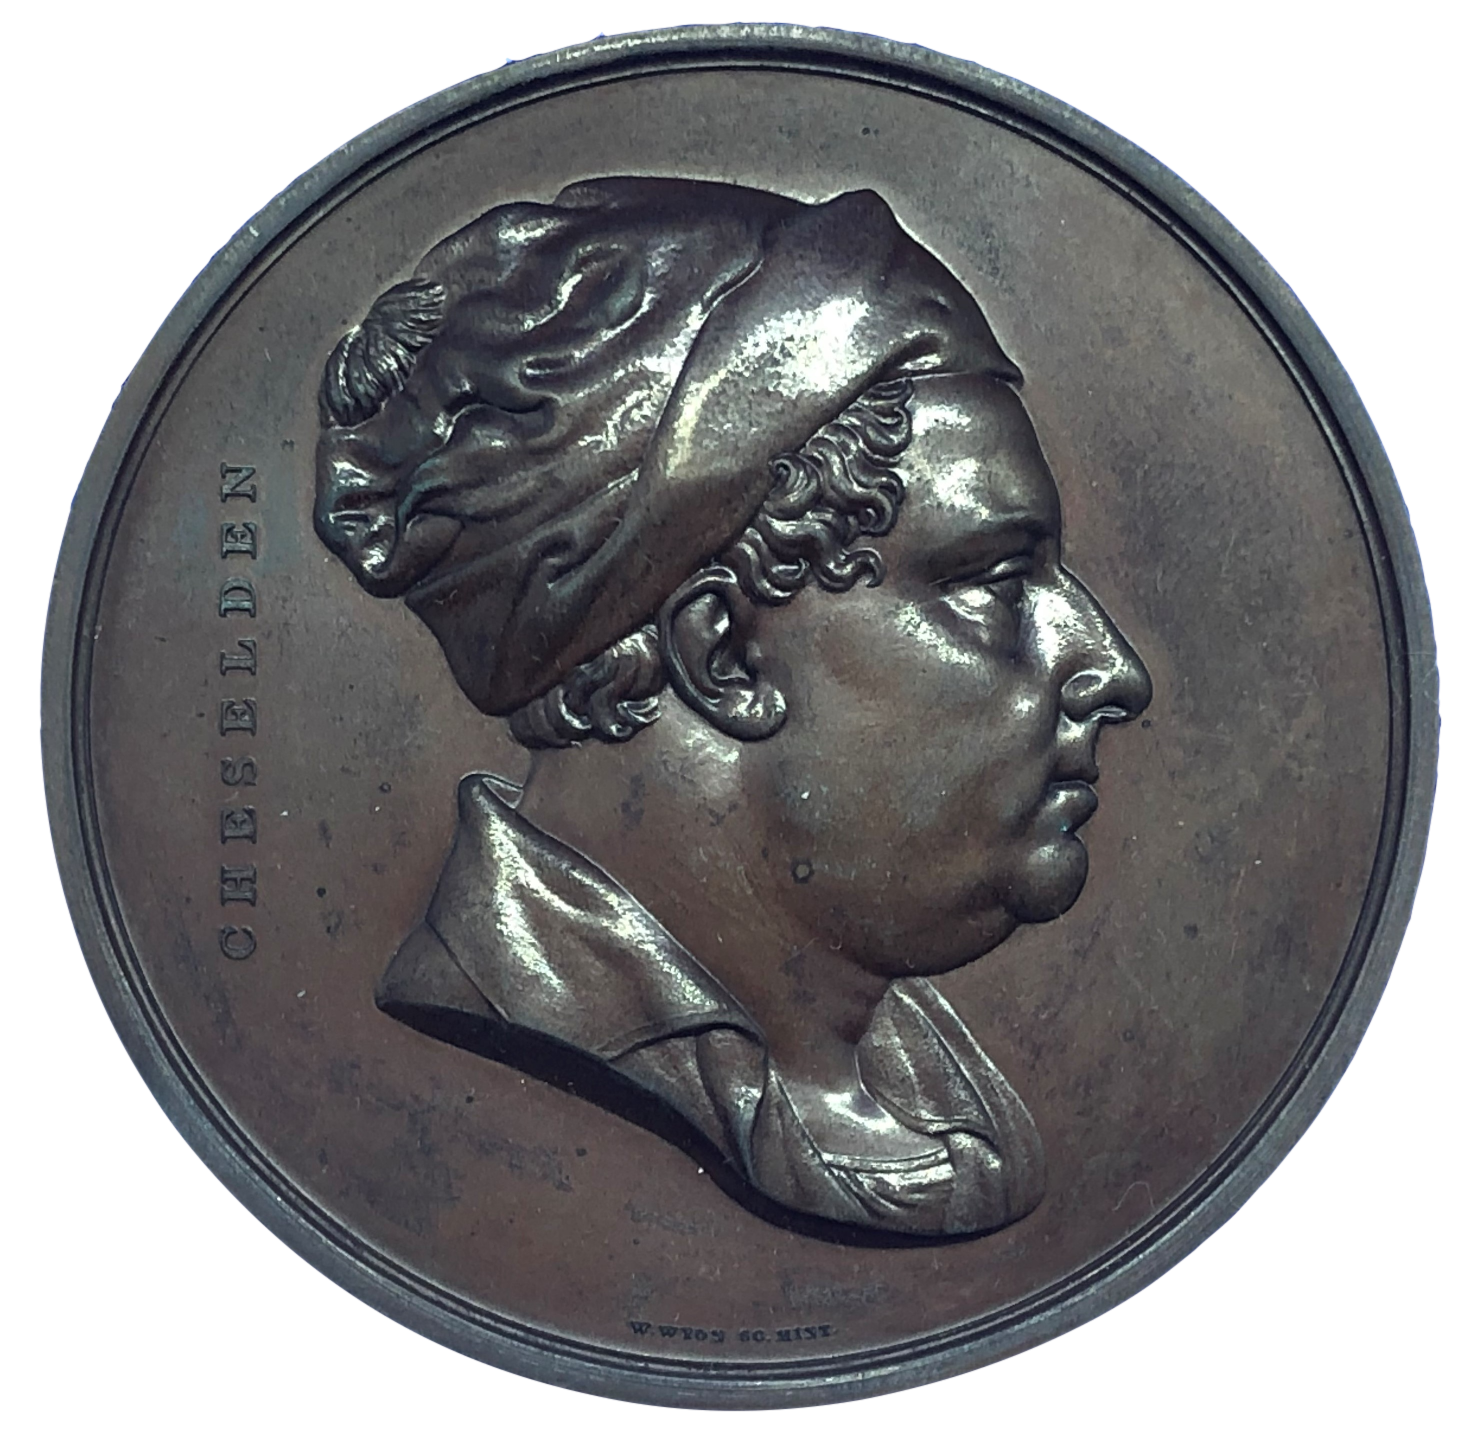 1752 St Thomas Hospital - Cheselden Medal (First Struck in 1829) by W Wyon Obverse